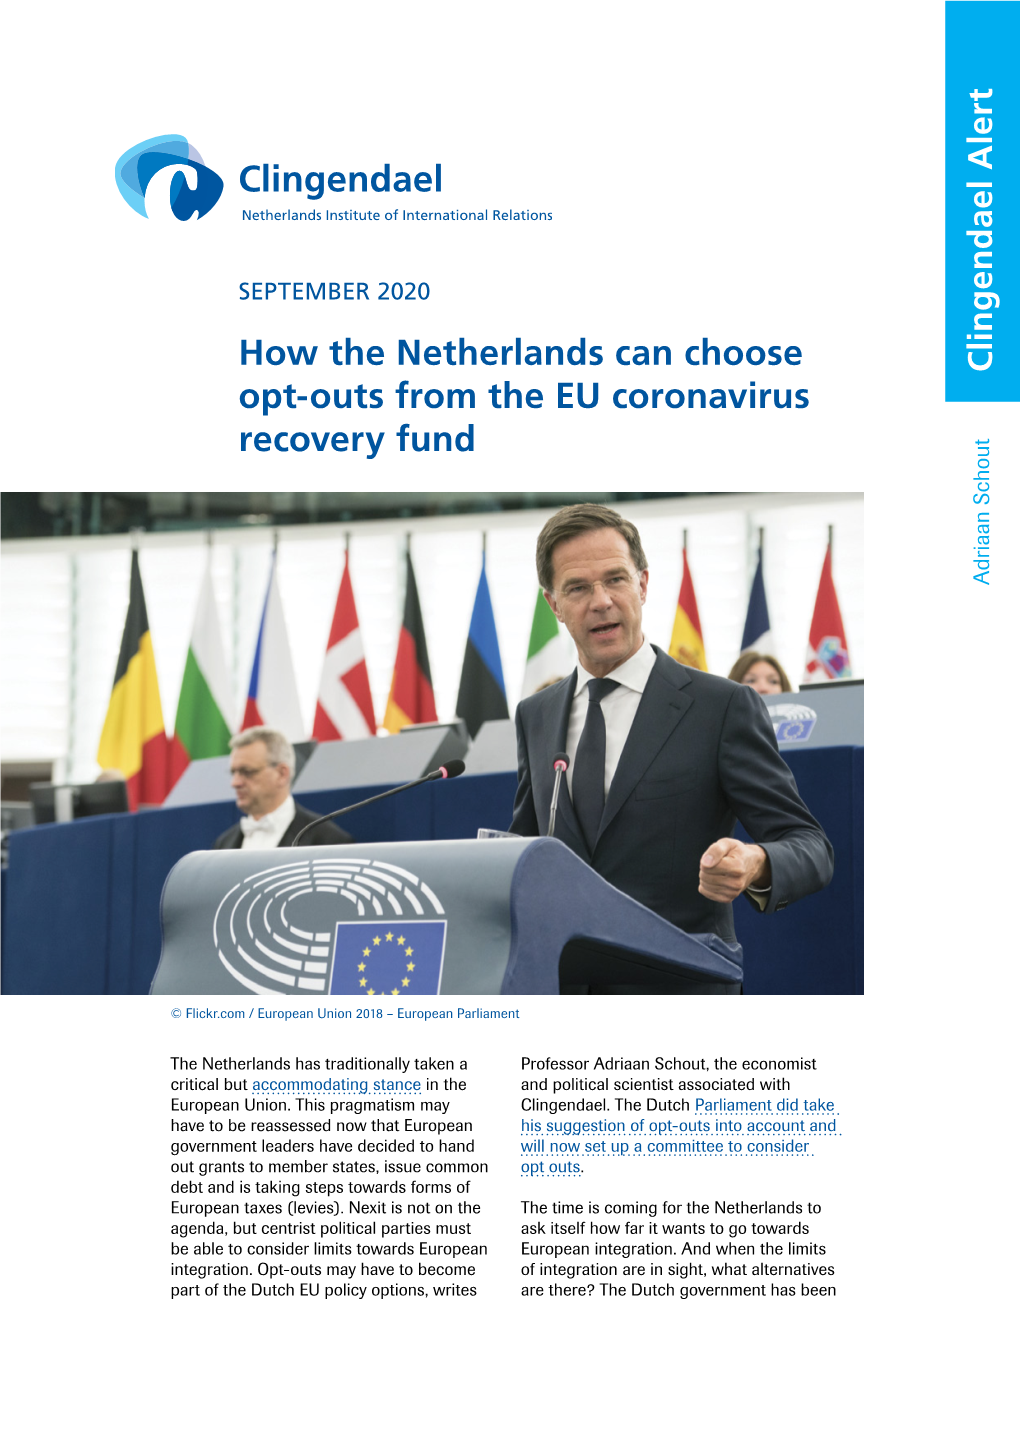 How the Netherlands Can Choose Opt-Outs from the EU Coronavirus